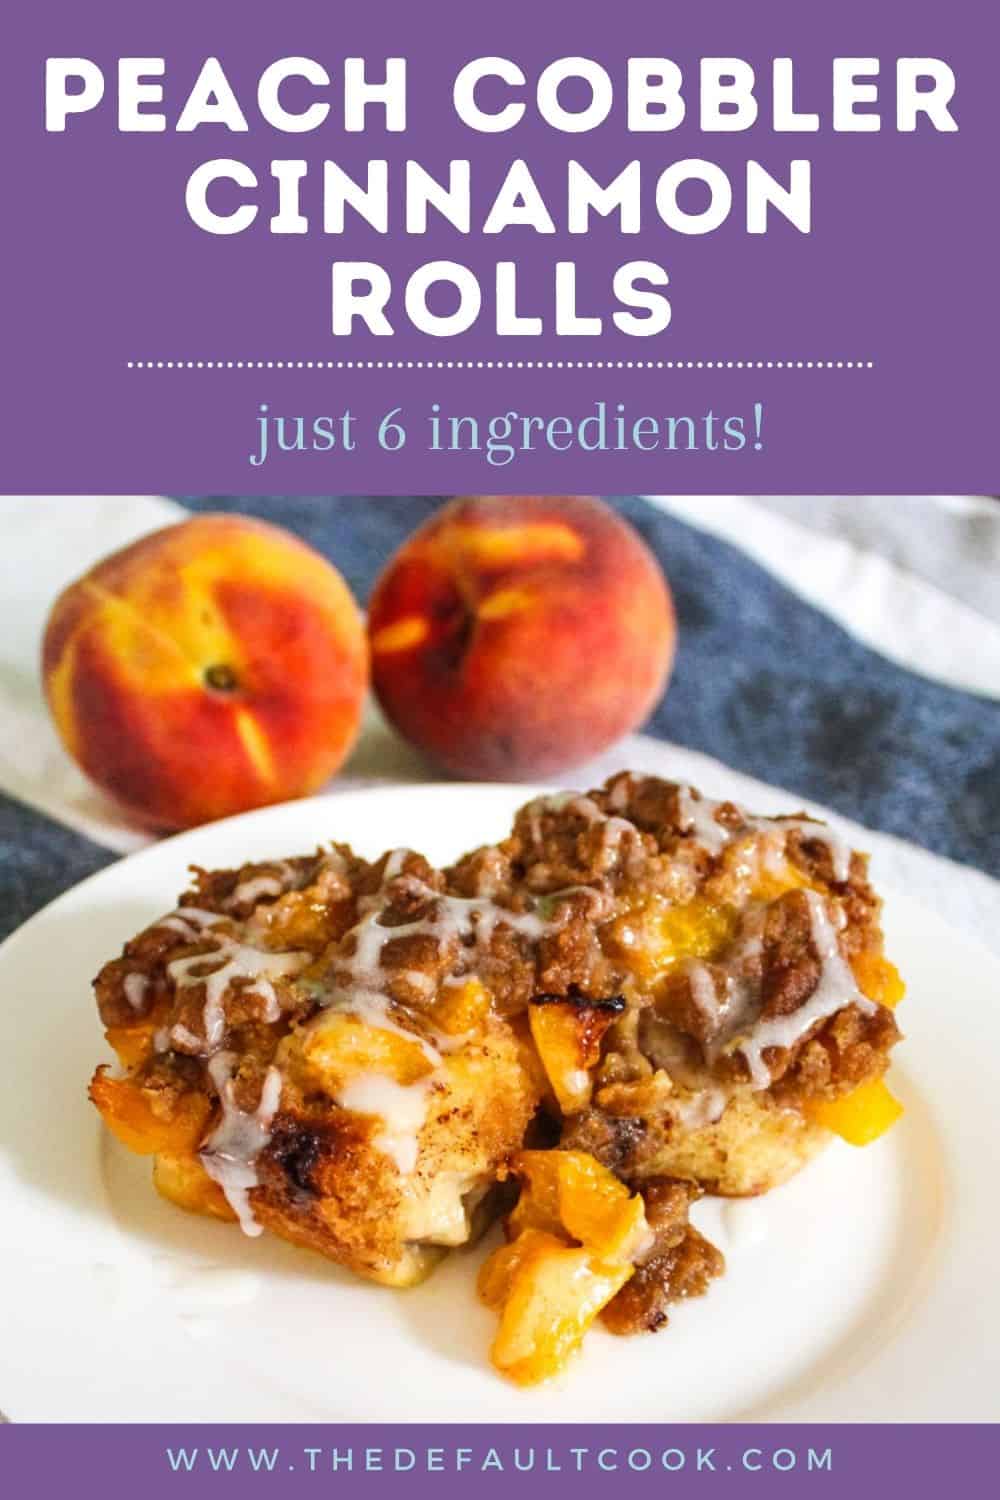 Two cinnamon rolls on a white plate, text above reads "peach cobbler cinnamon rolls, just 6 ingredients".